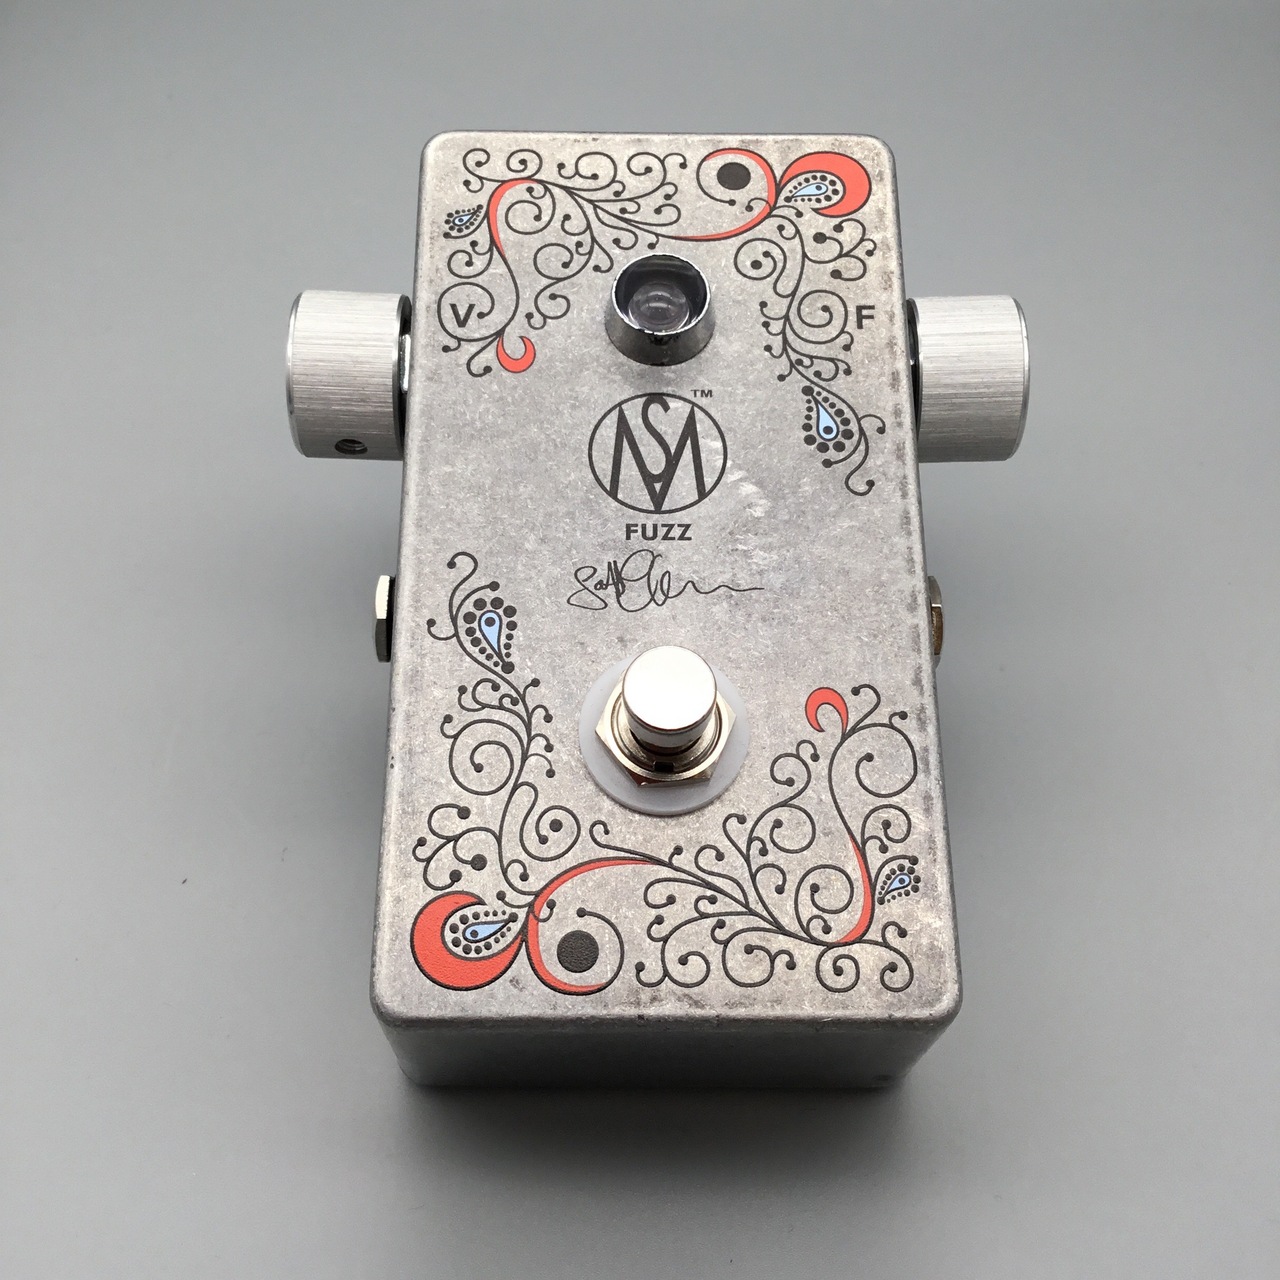 SM Pedals SM Fuzz Pedalを展示しています【エフェクター】｜島村楽器 ...